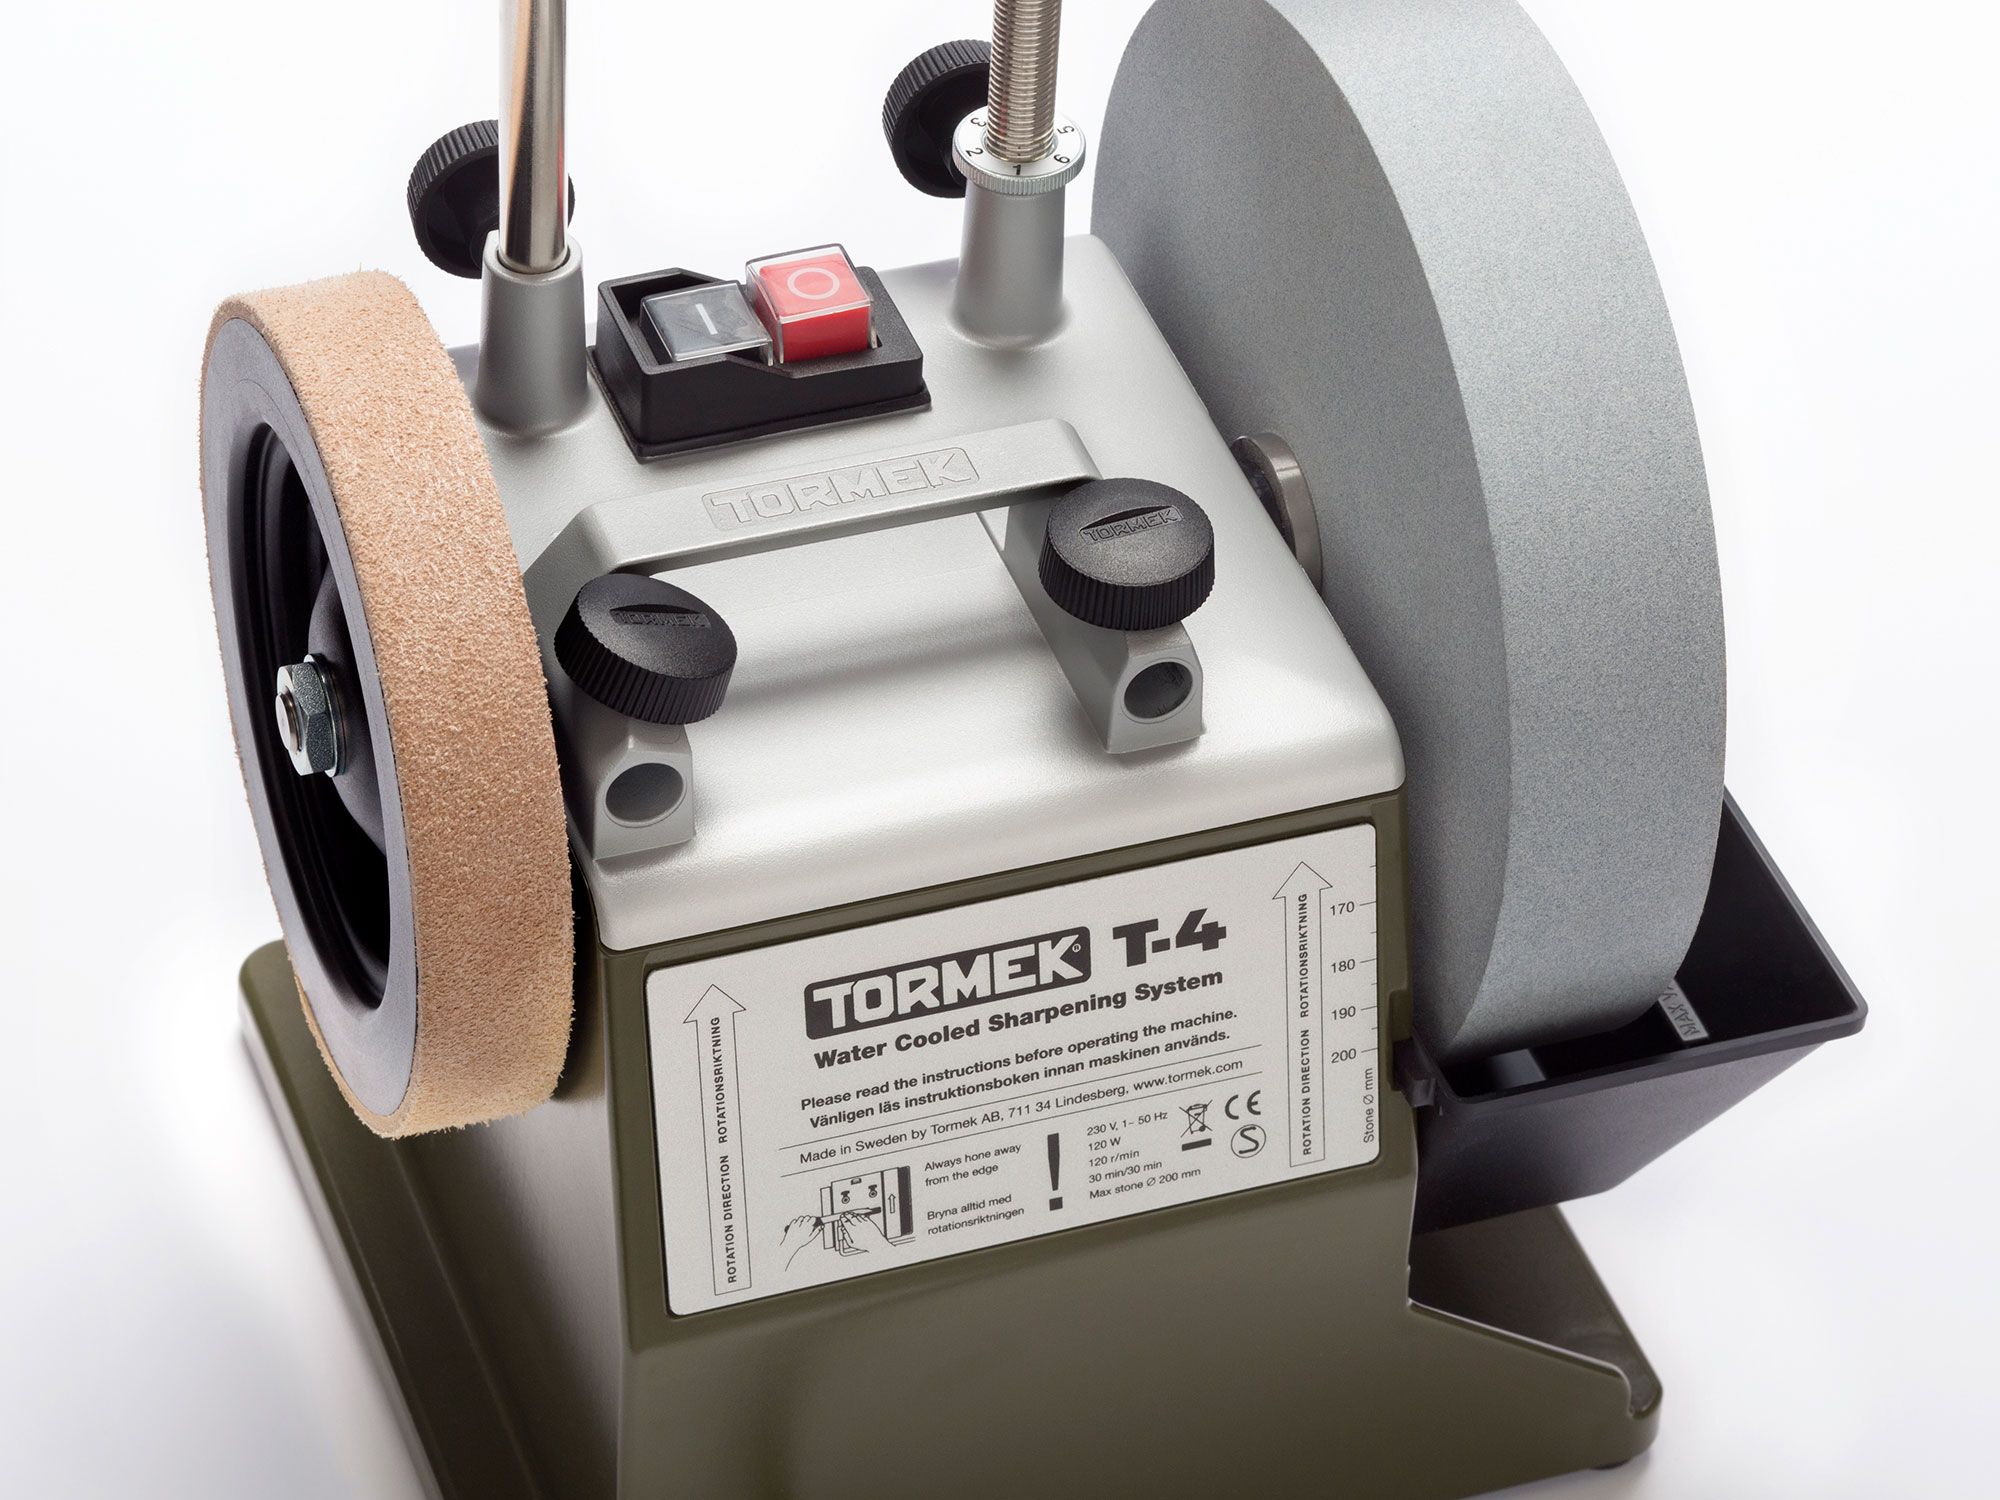 Tormek T4 Water Cooled Sharpening System 